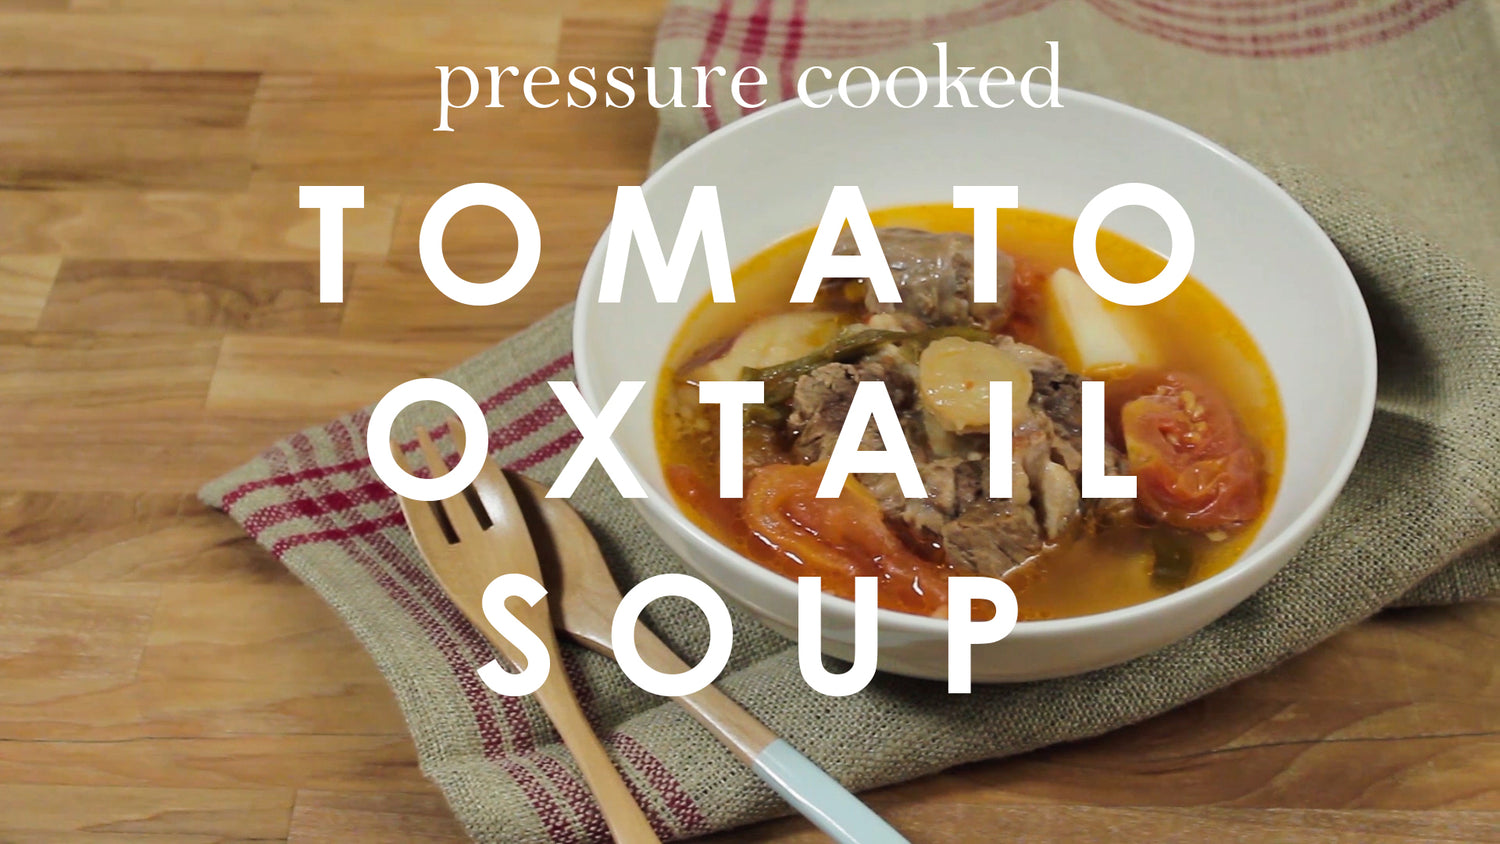 Pressure Cooked Tomato Oxtail Soup